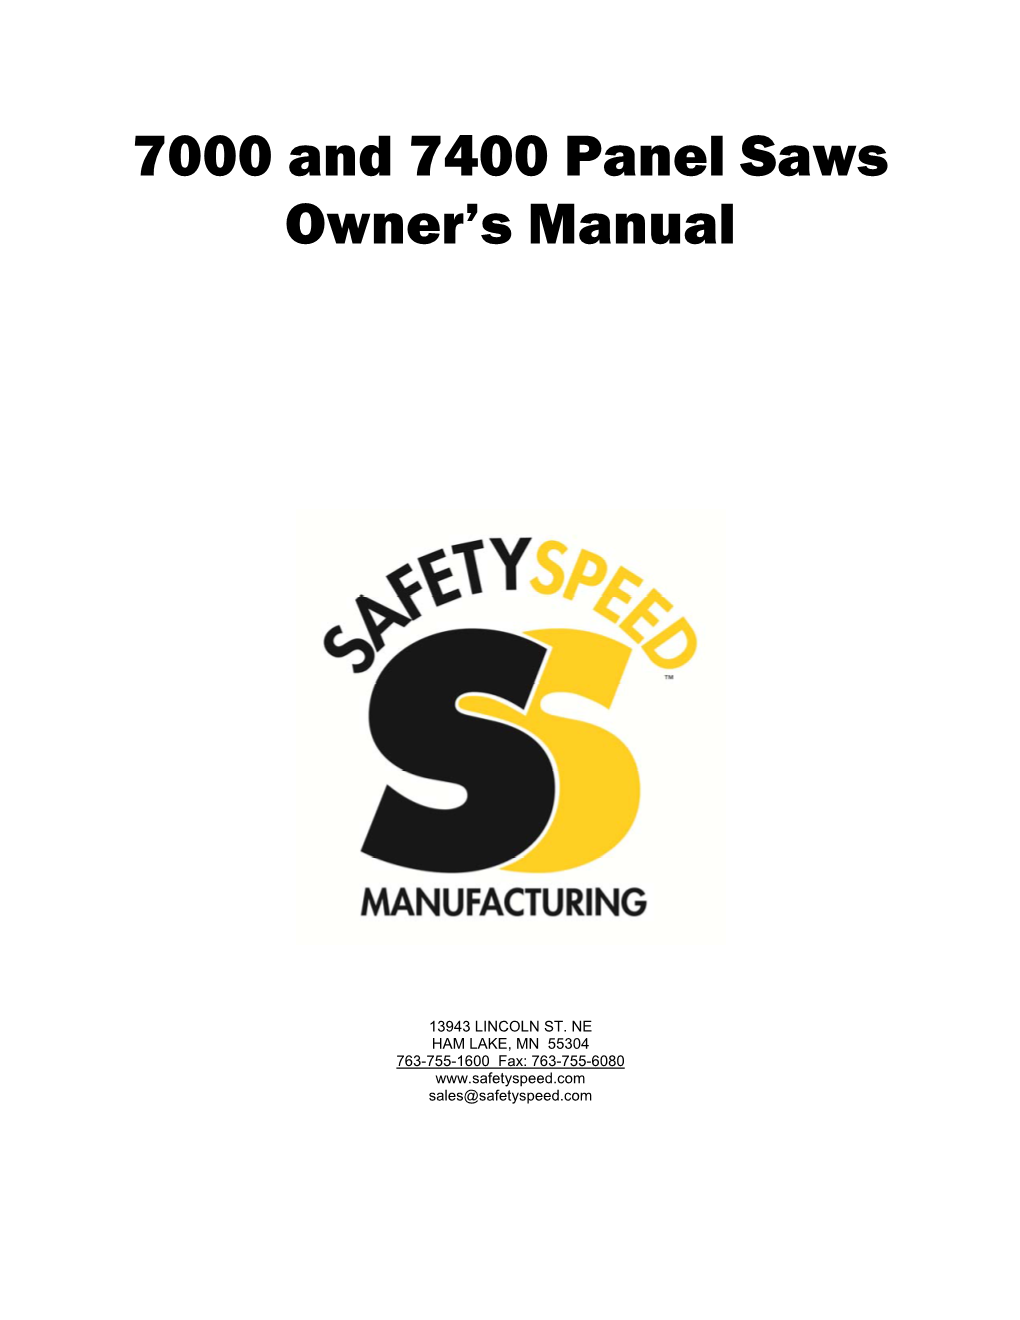 7000 and 7400 Panel Saws Owner's Manual